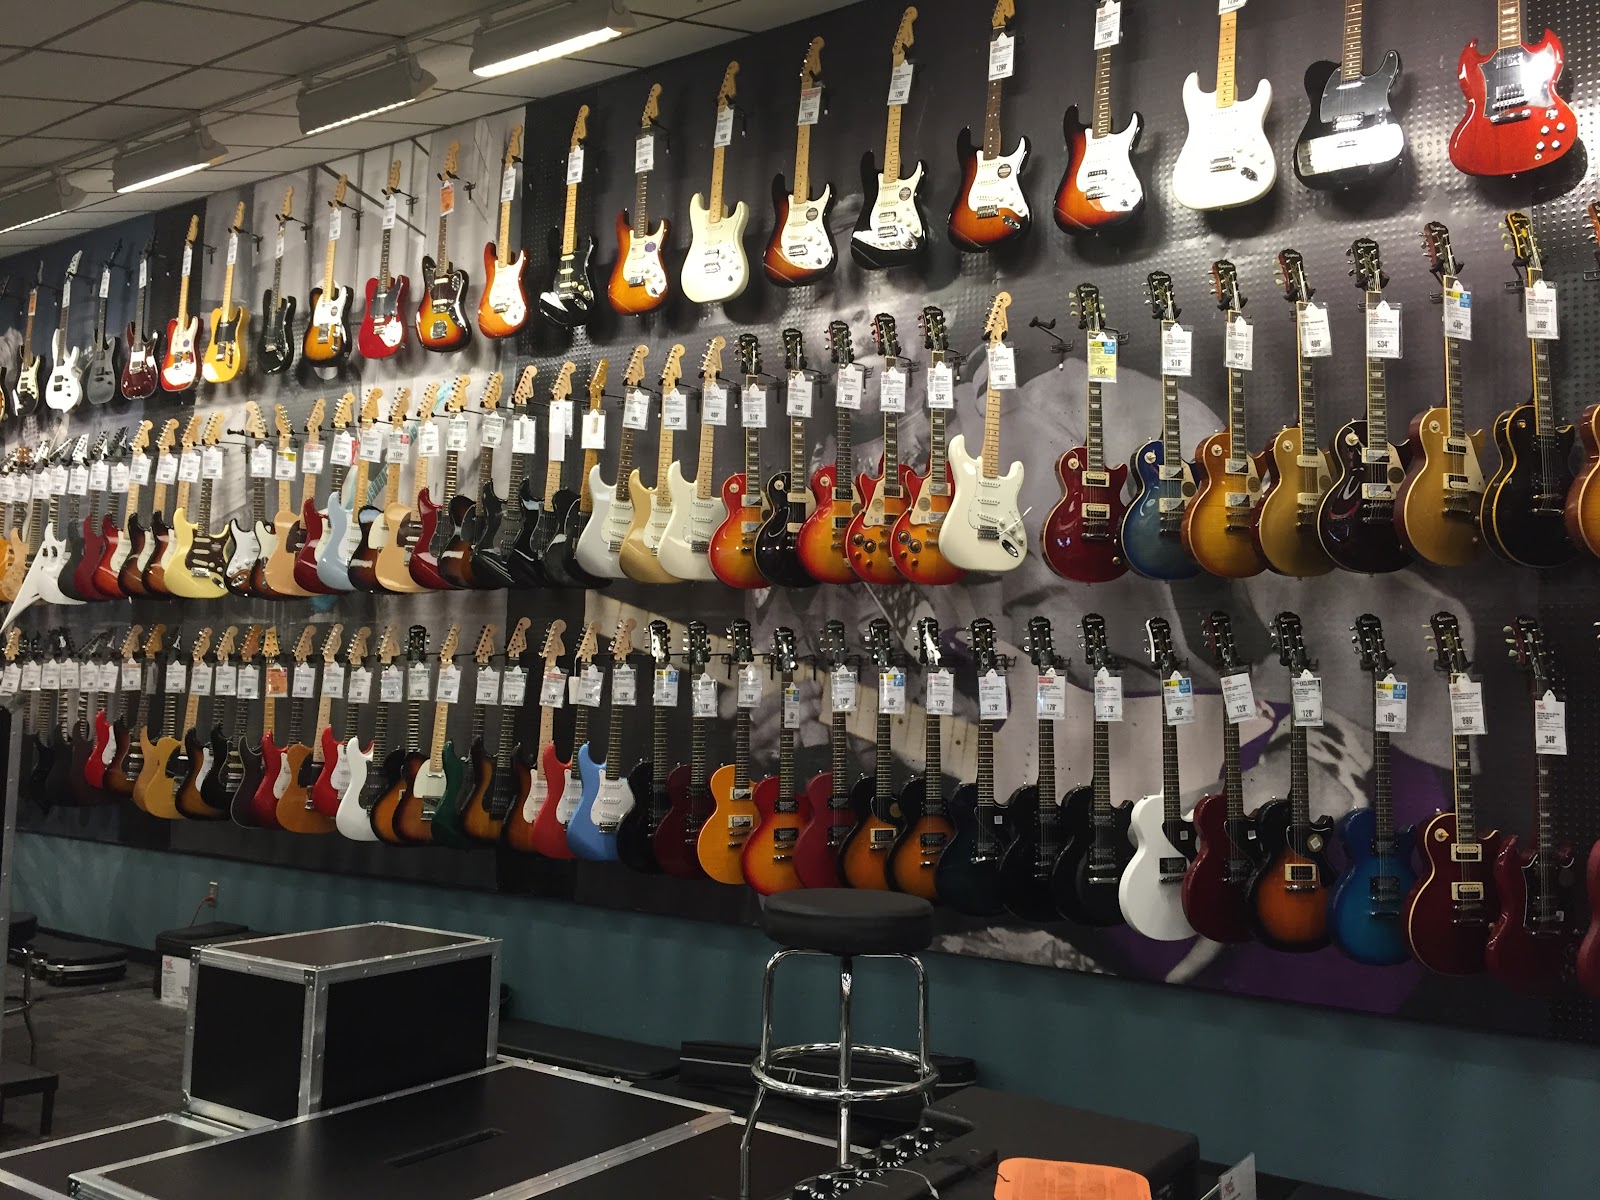 Production guitars on display in a music shop